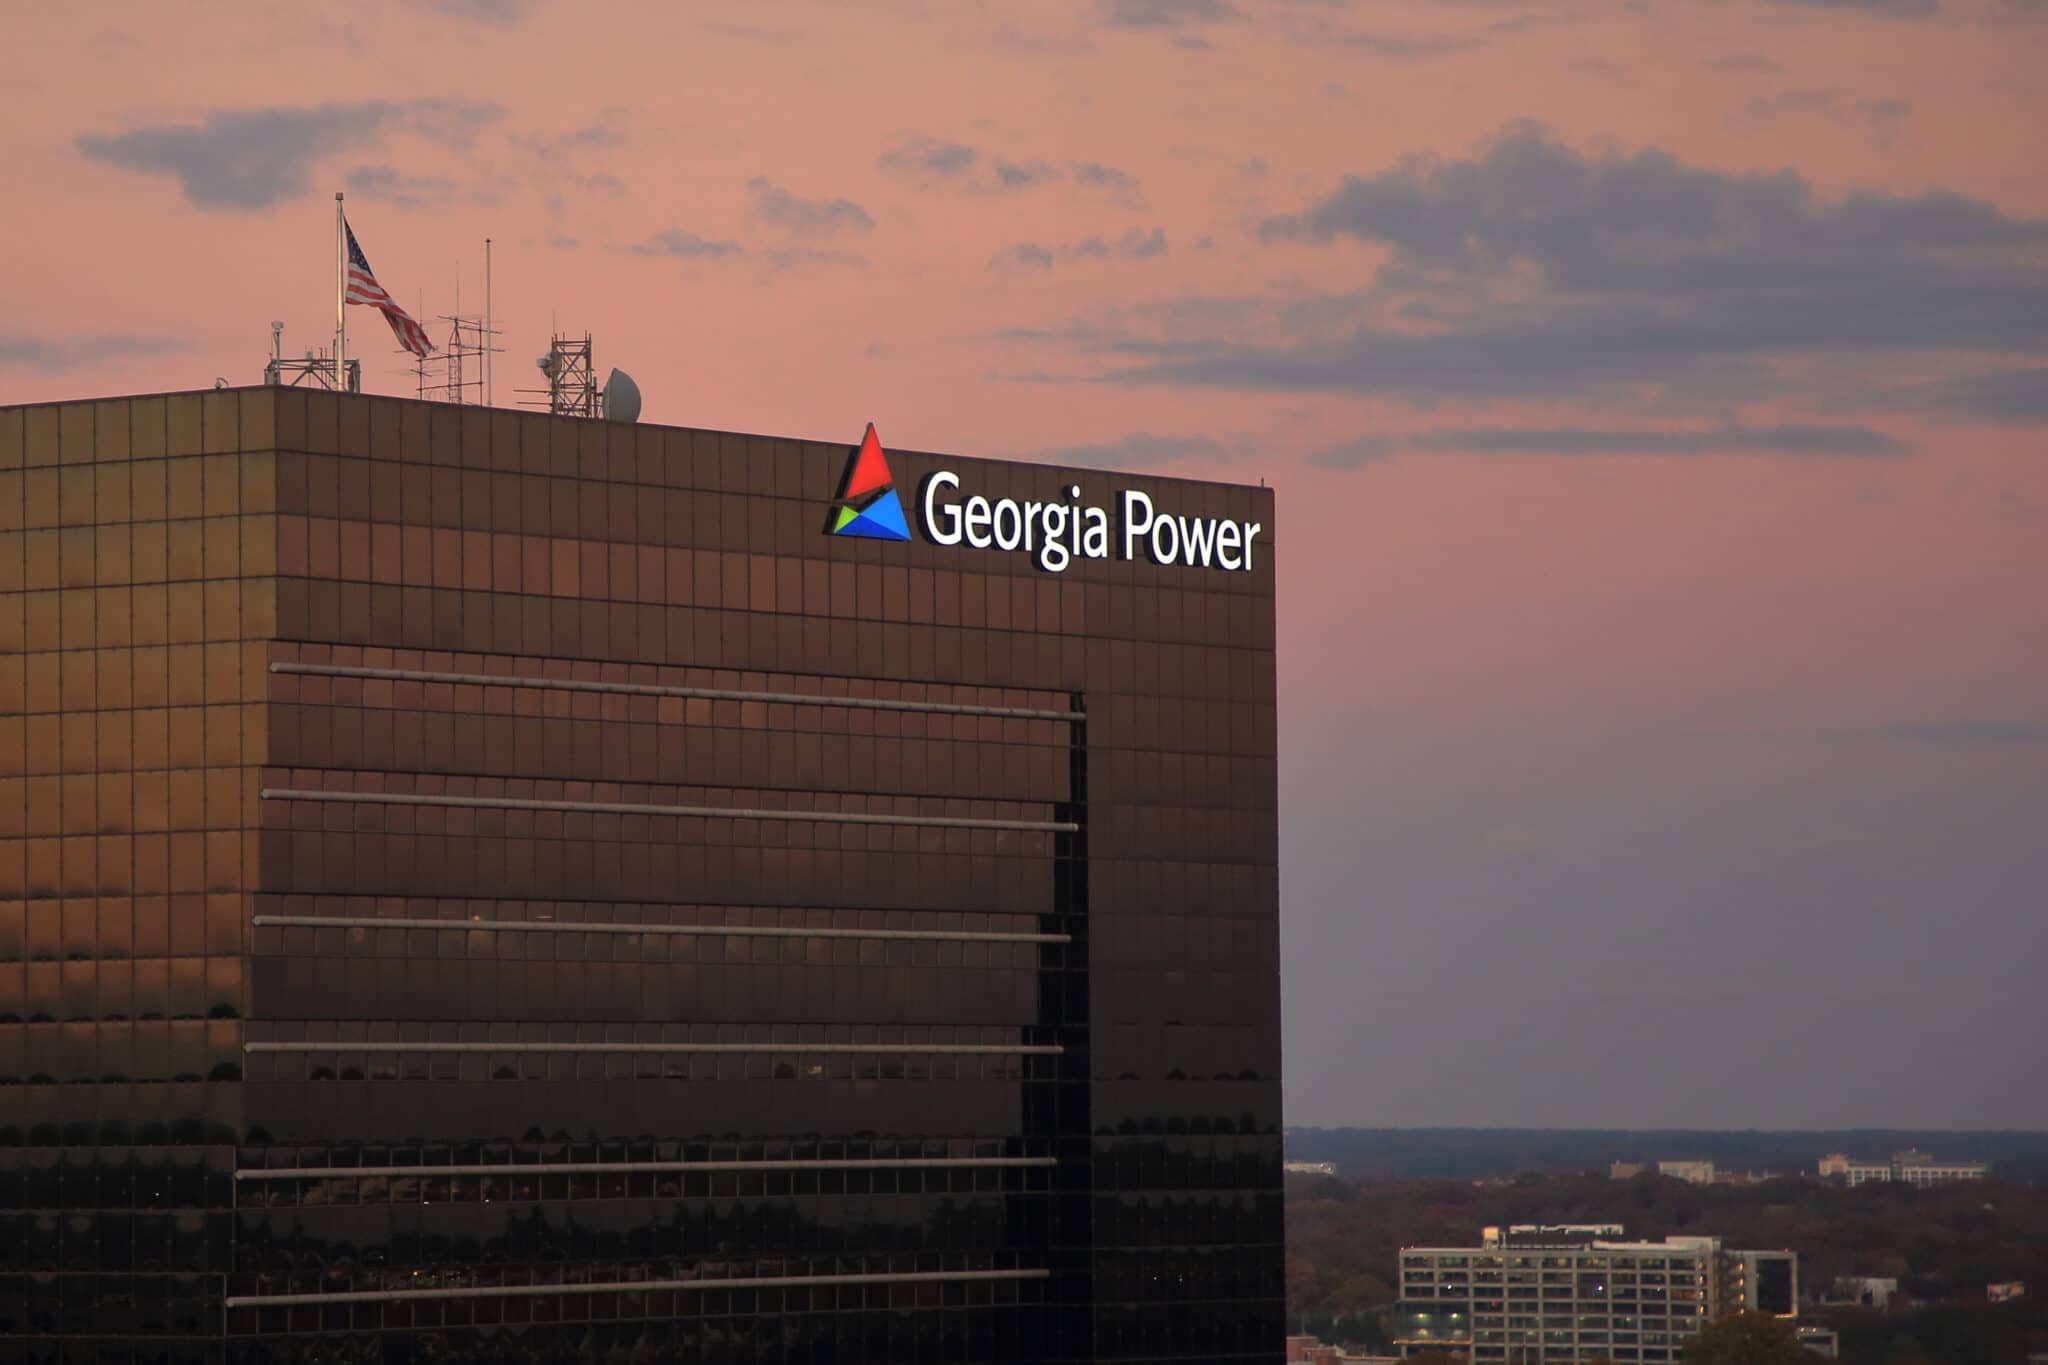 Georgia Power has agreed to lower its rate increase. Here's how it affects you